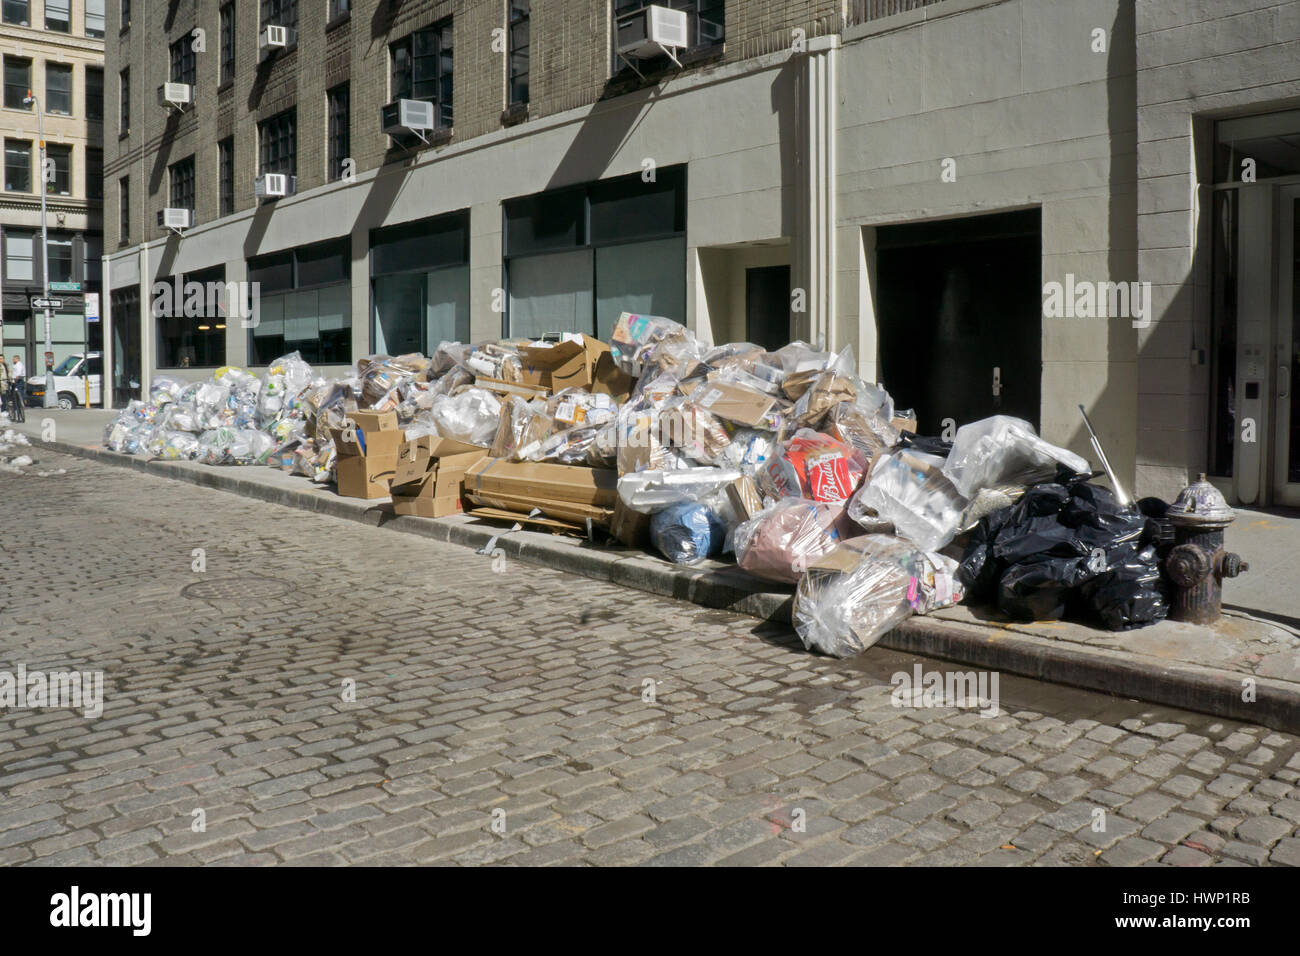 https://c8.alamy.com/comp/HWP1RB/a-huge-pile-of-garbage-bags-awaiting-collection-on-greene-street-in-HWP1RB.jpg